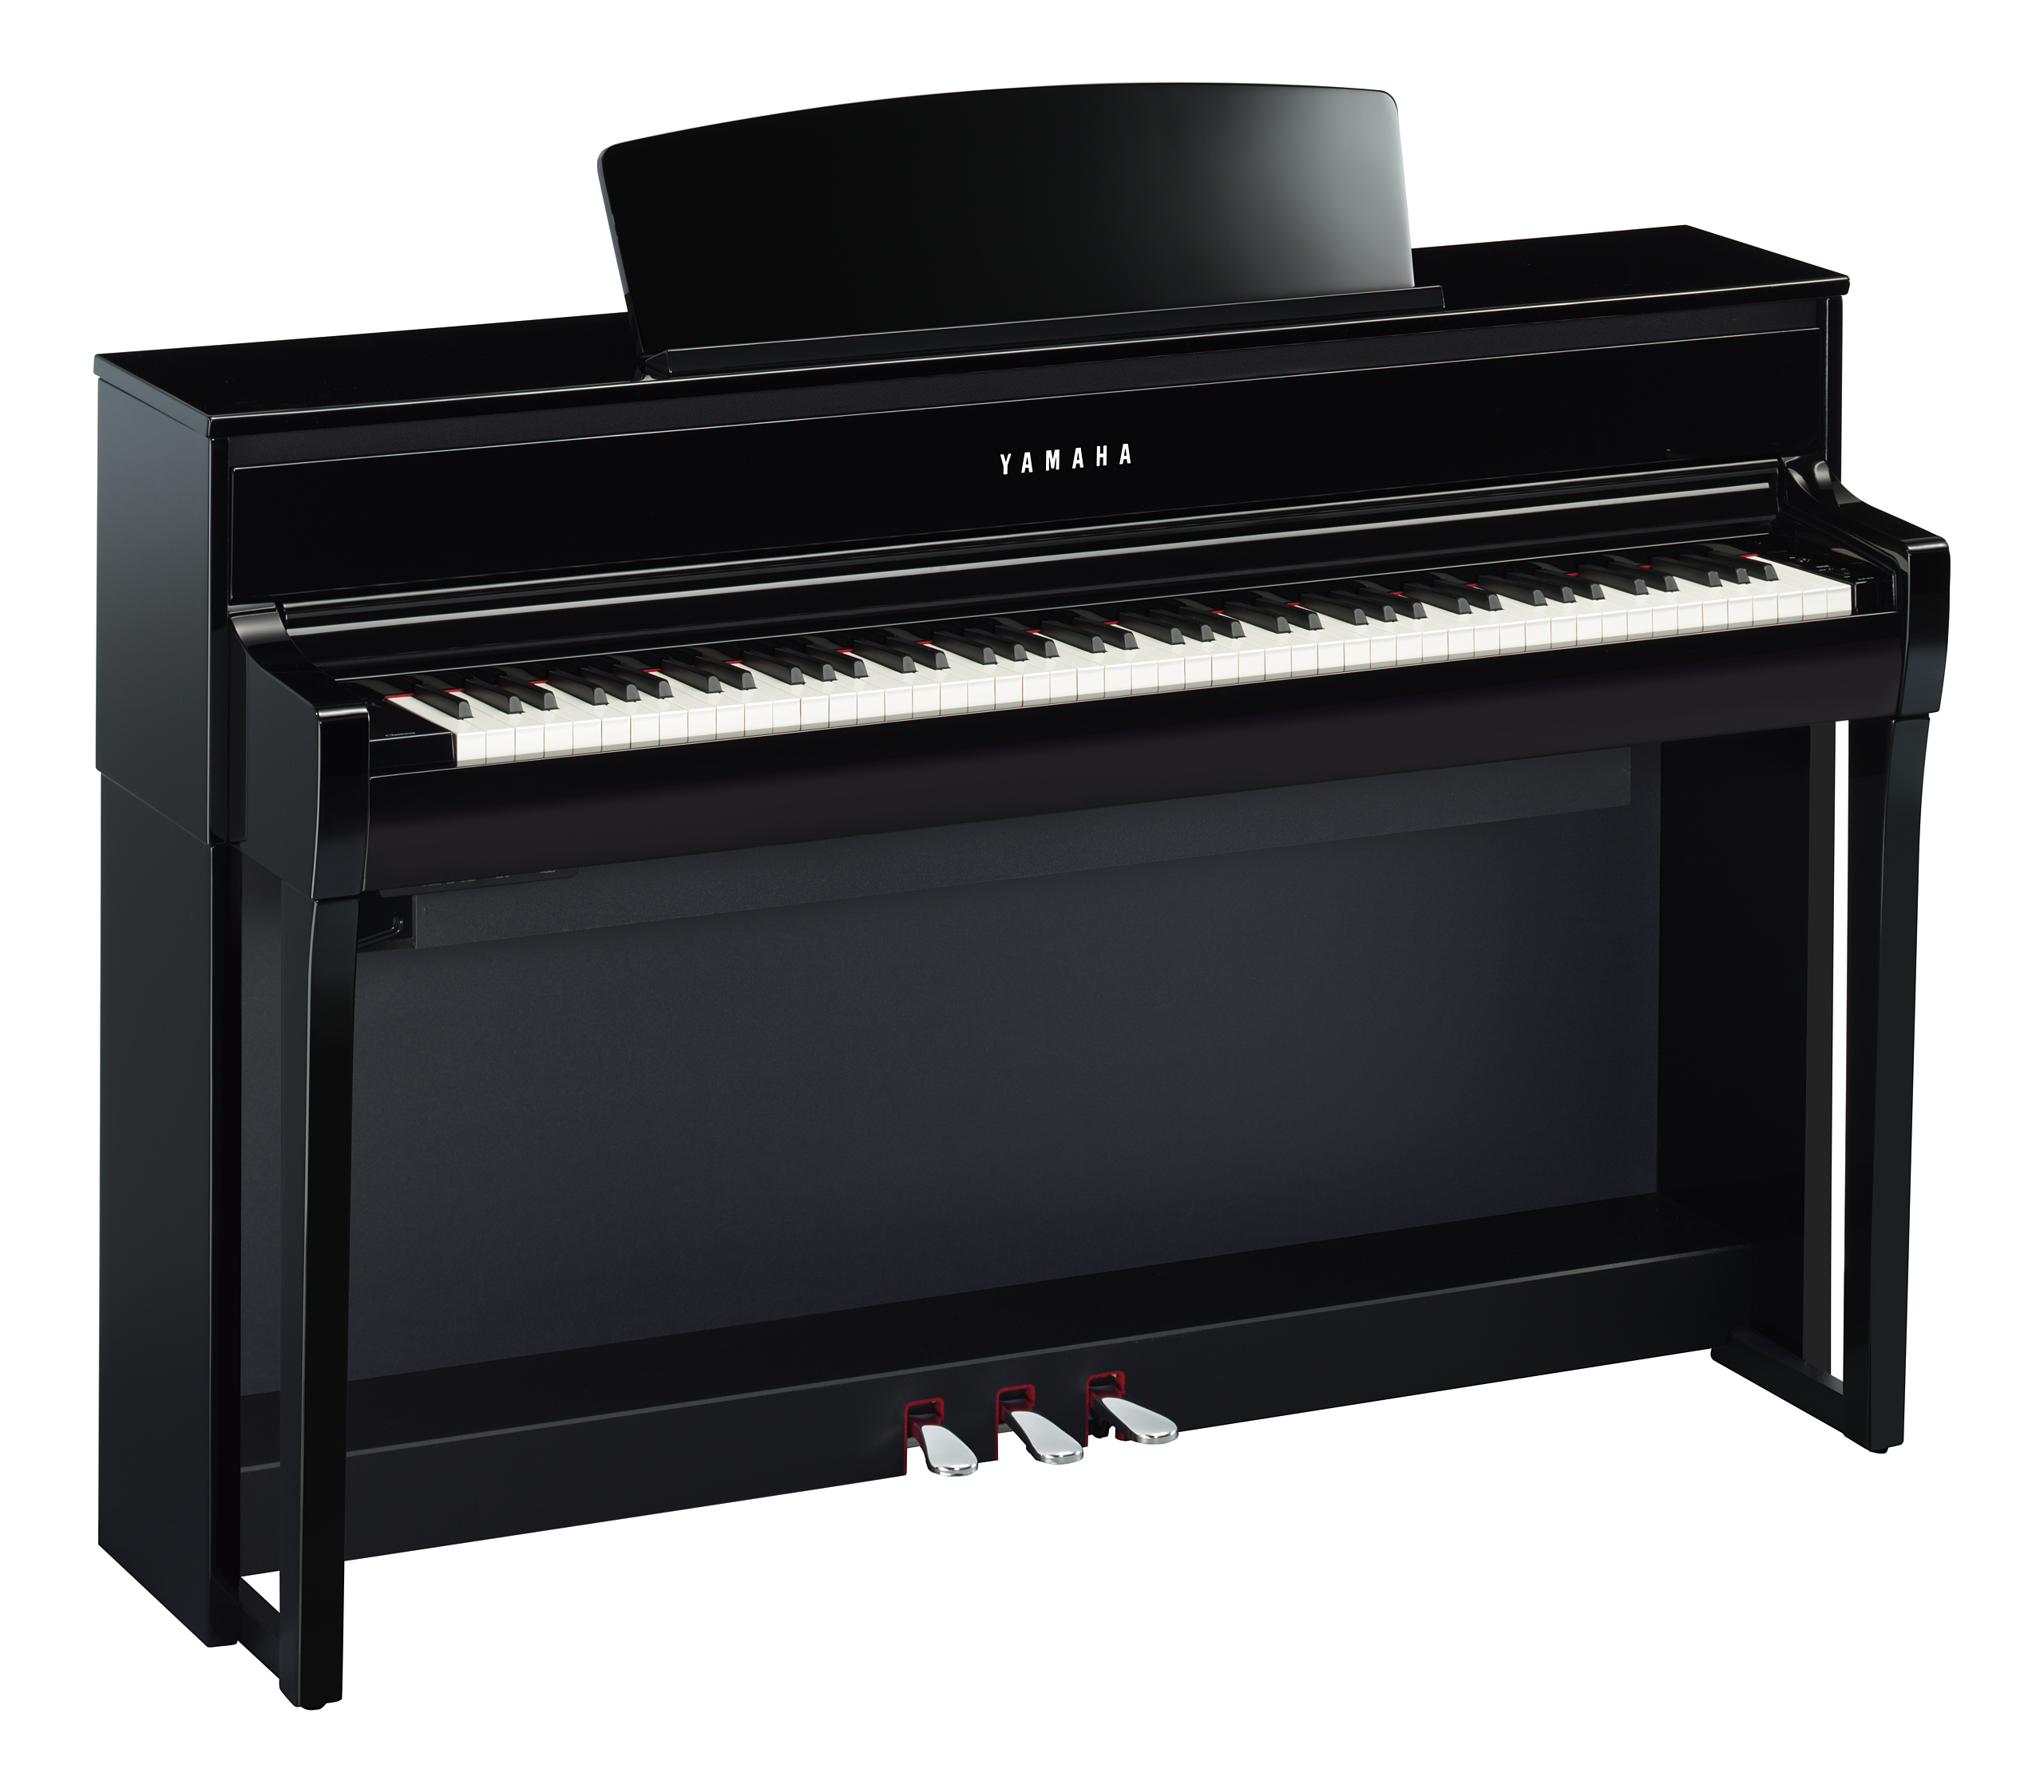 Yamaha Clp775pe - Digital piano with stand - Variation 1